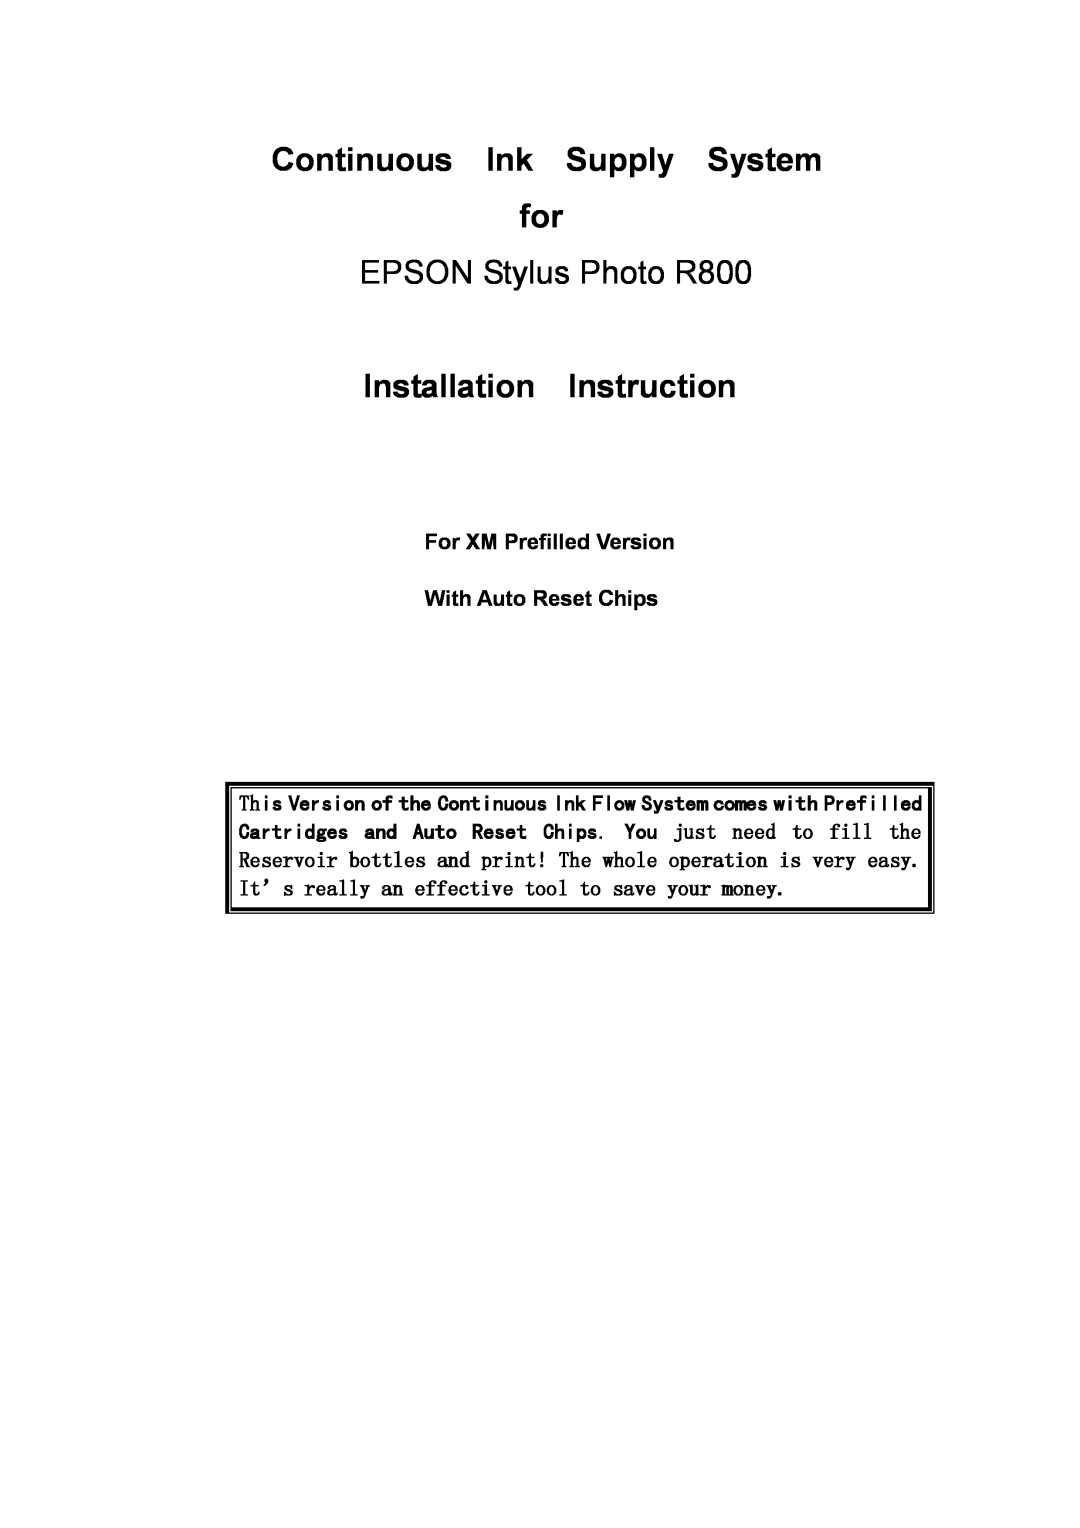 Epson manual For EPSON Stylus Photo R1800 EPSON Stylus Photo R800, SubliJet IQ, Getting Started Guide 